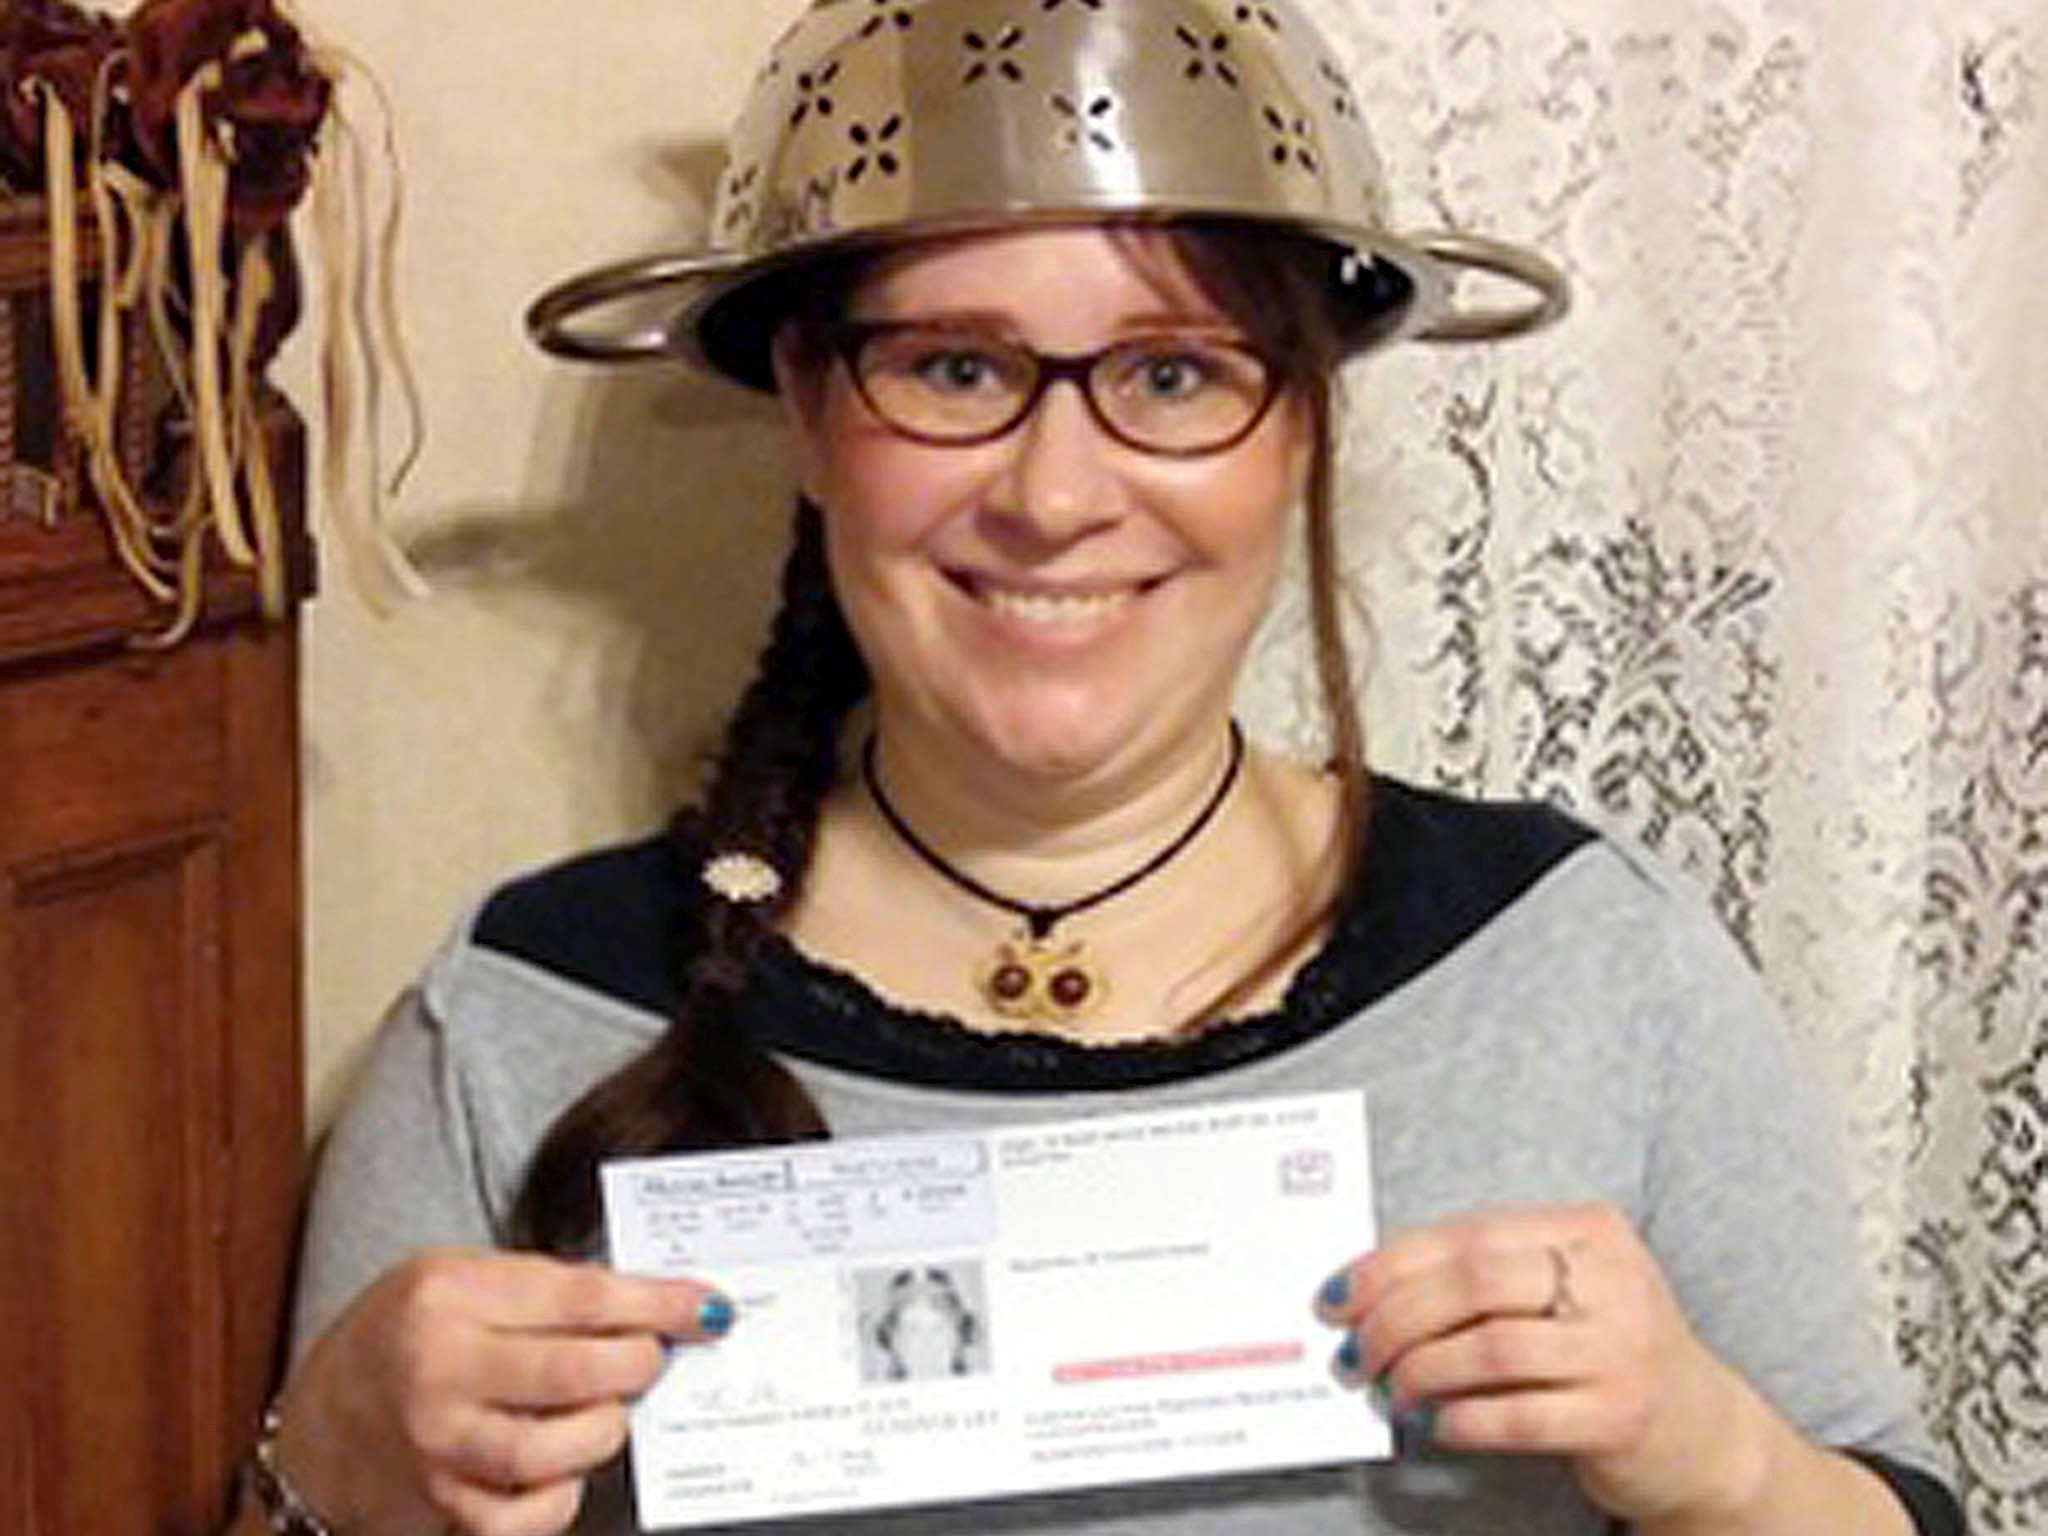 Lindsay Miller wears a spaghetti strainer to reflect her religious beliefs while holding her temporary driver license that also bears a photo of her wearing the colander.